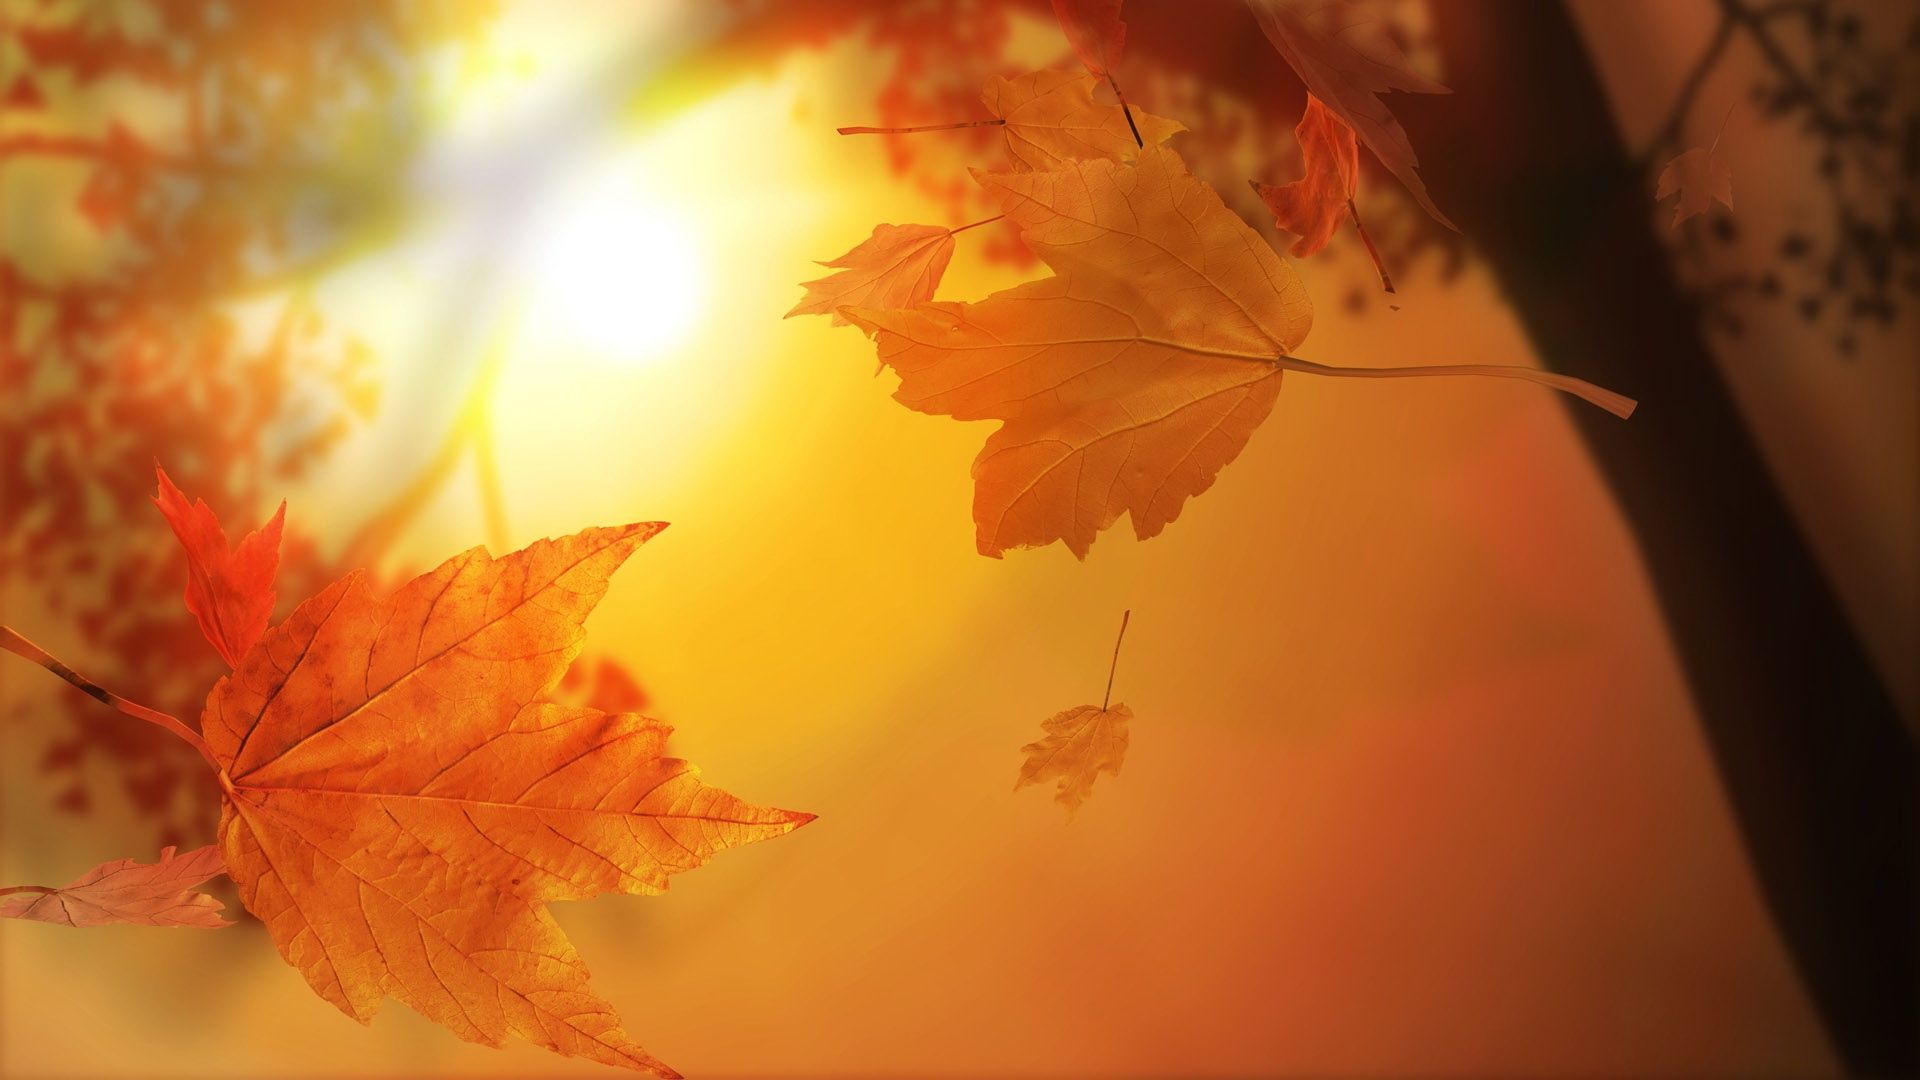 Autumn wallpaper quotes HD and autumn sayings messages 1920x1080